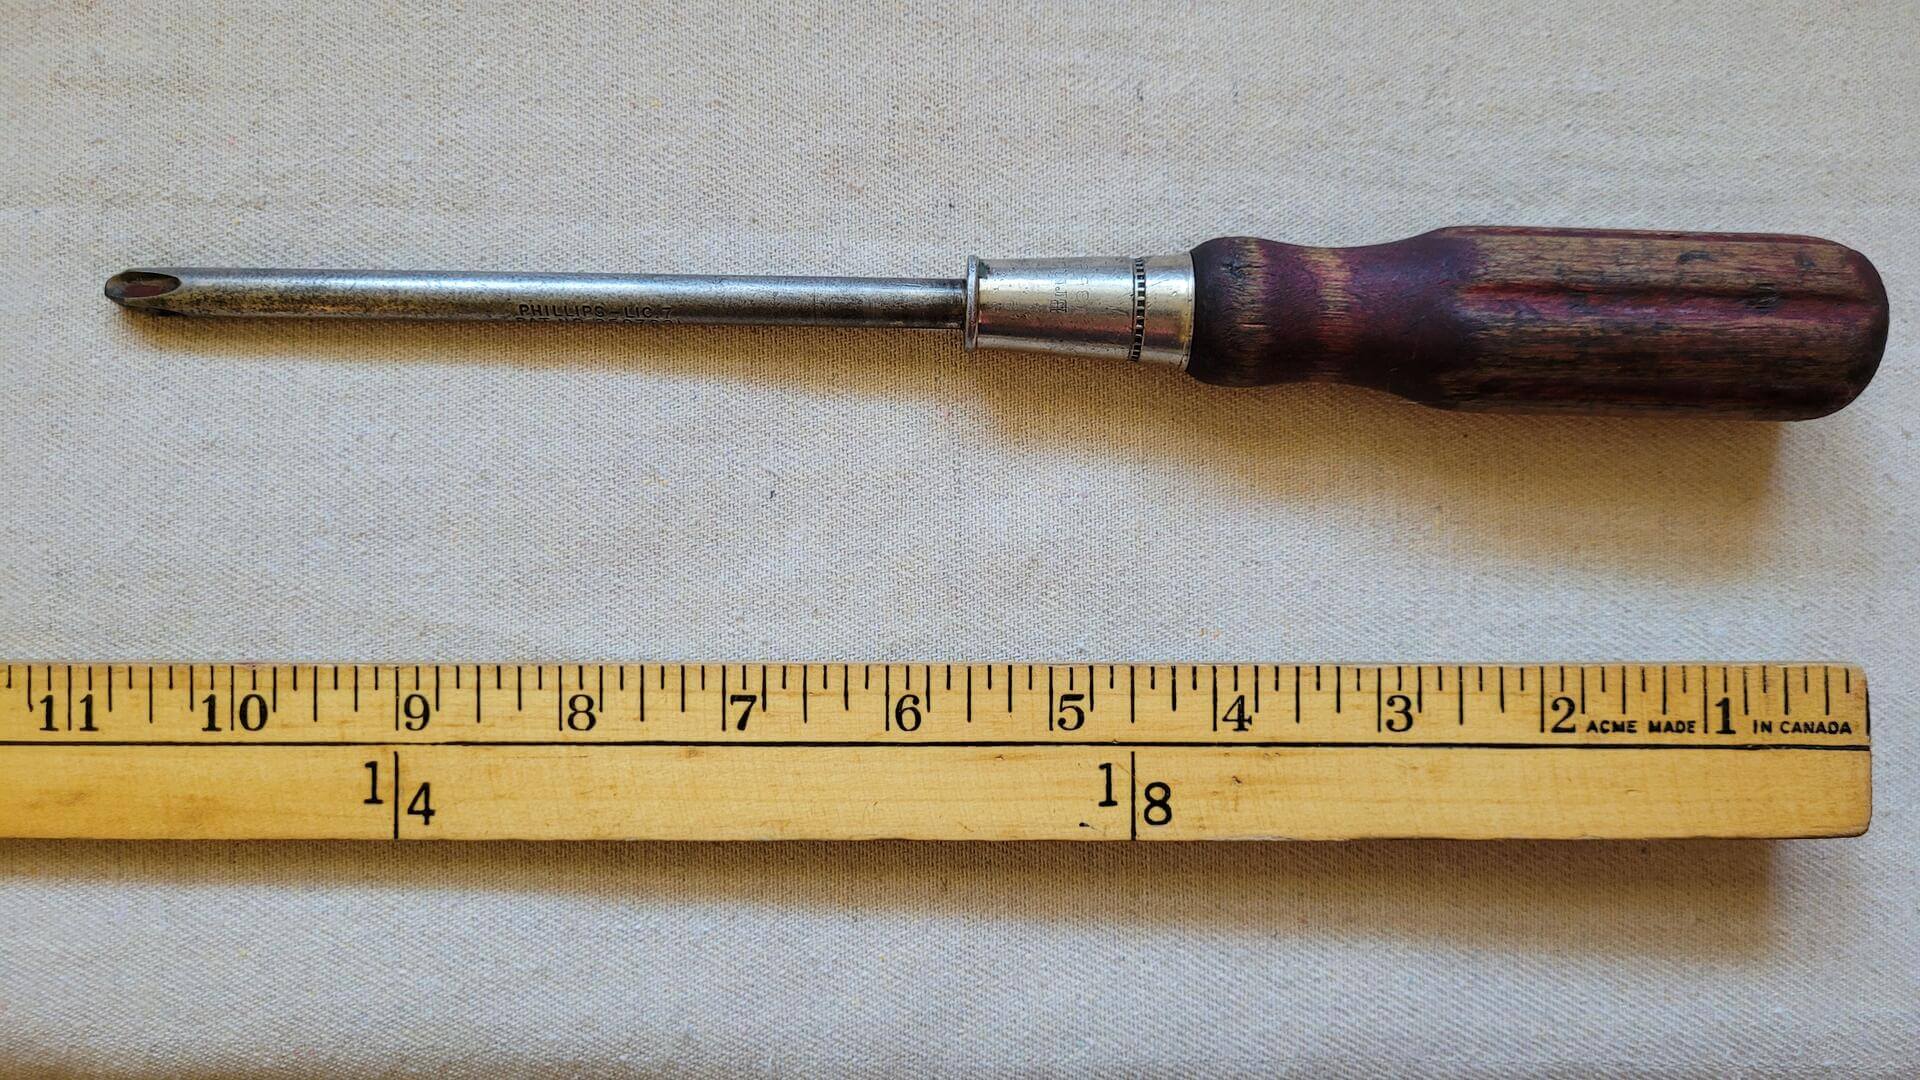 Antique Bridgeport Phillips Screwdriver w Wooden Handle Pat No 2507231 11 inches - Vintage made in USA collectible mid century antique hand tool